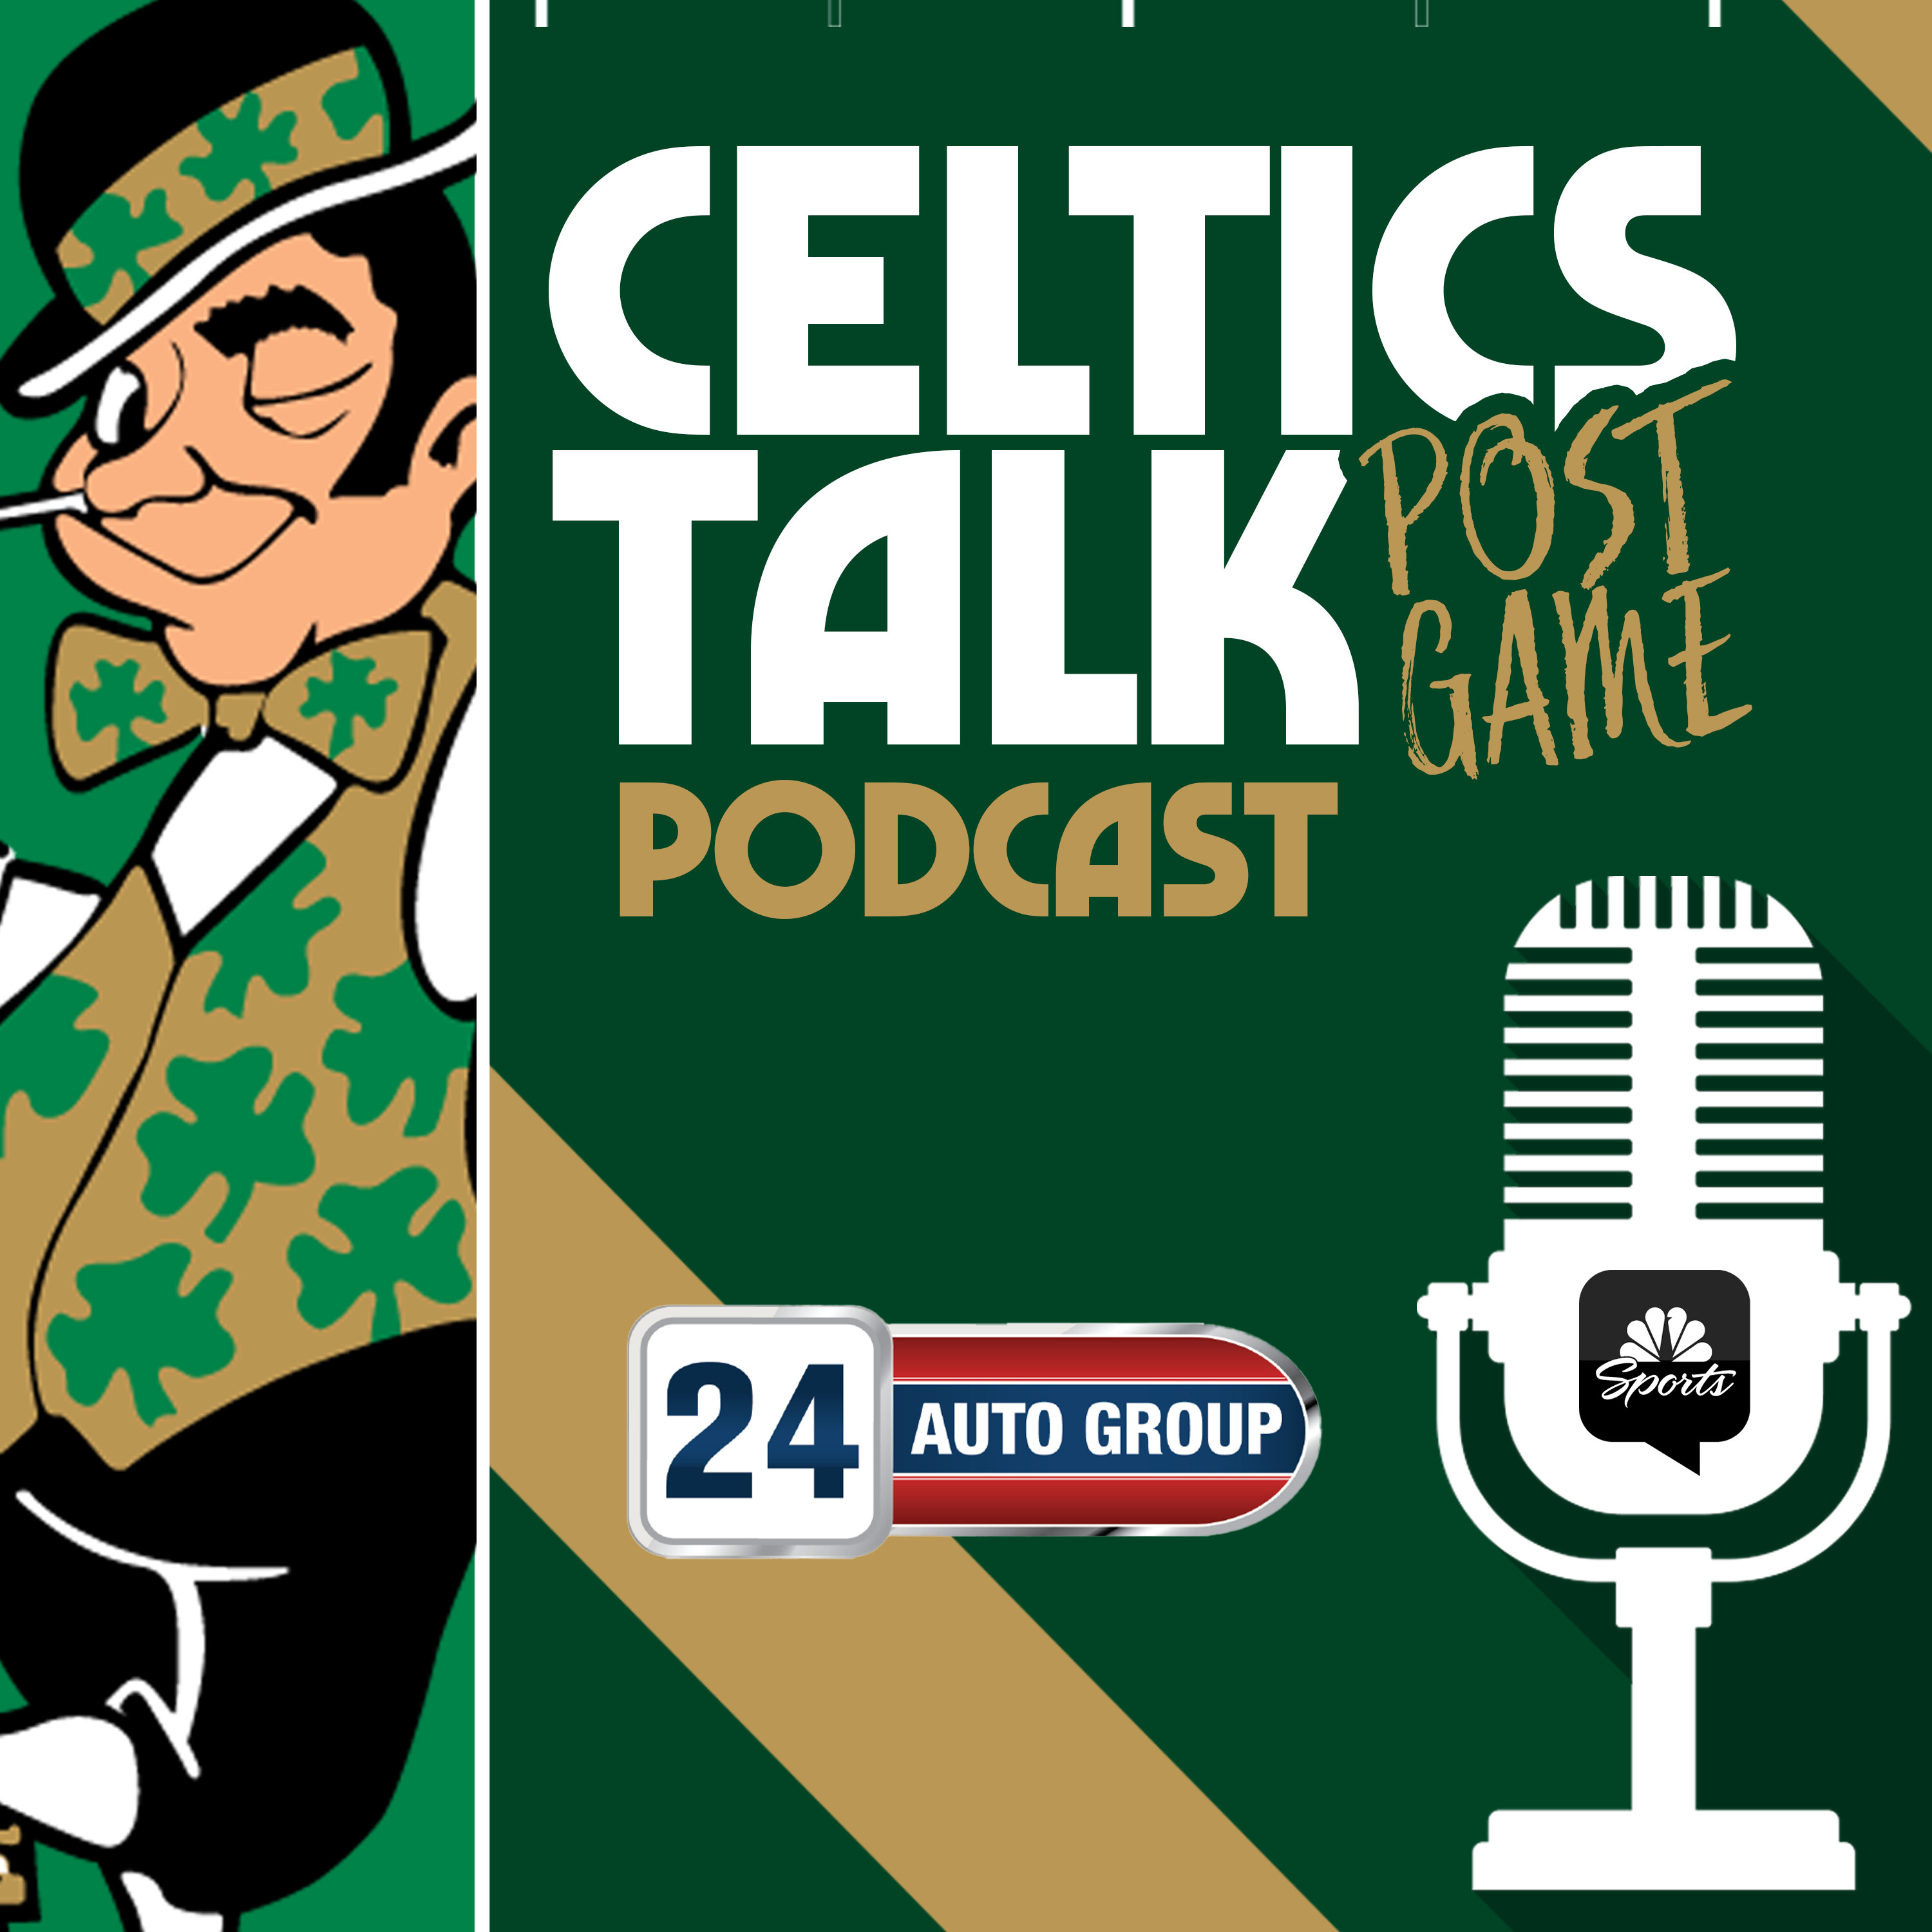 POSTGAME POD: C's earn 60th win, clinch best record for first time since '08 championship team